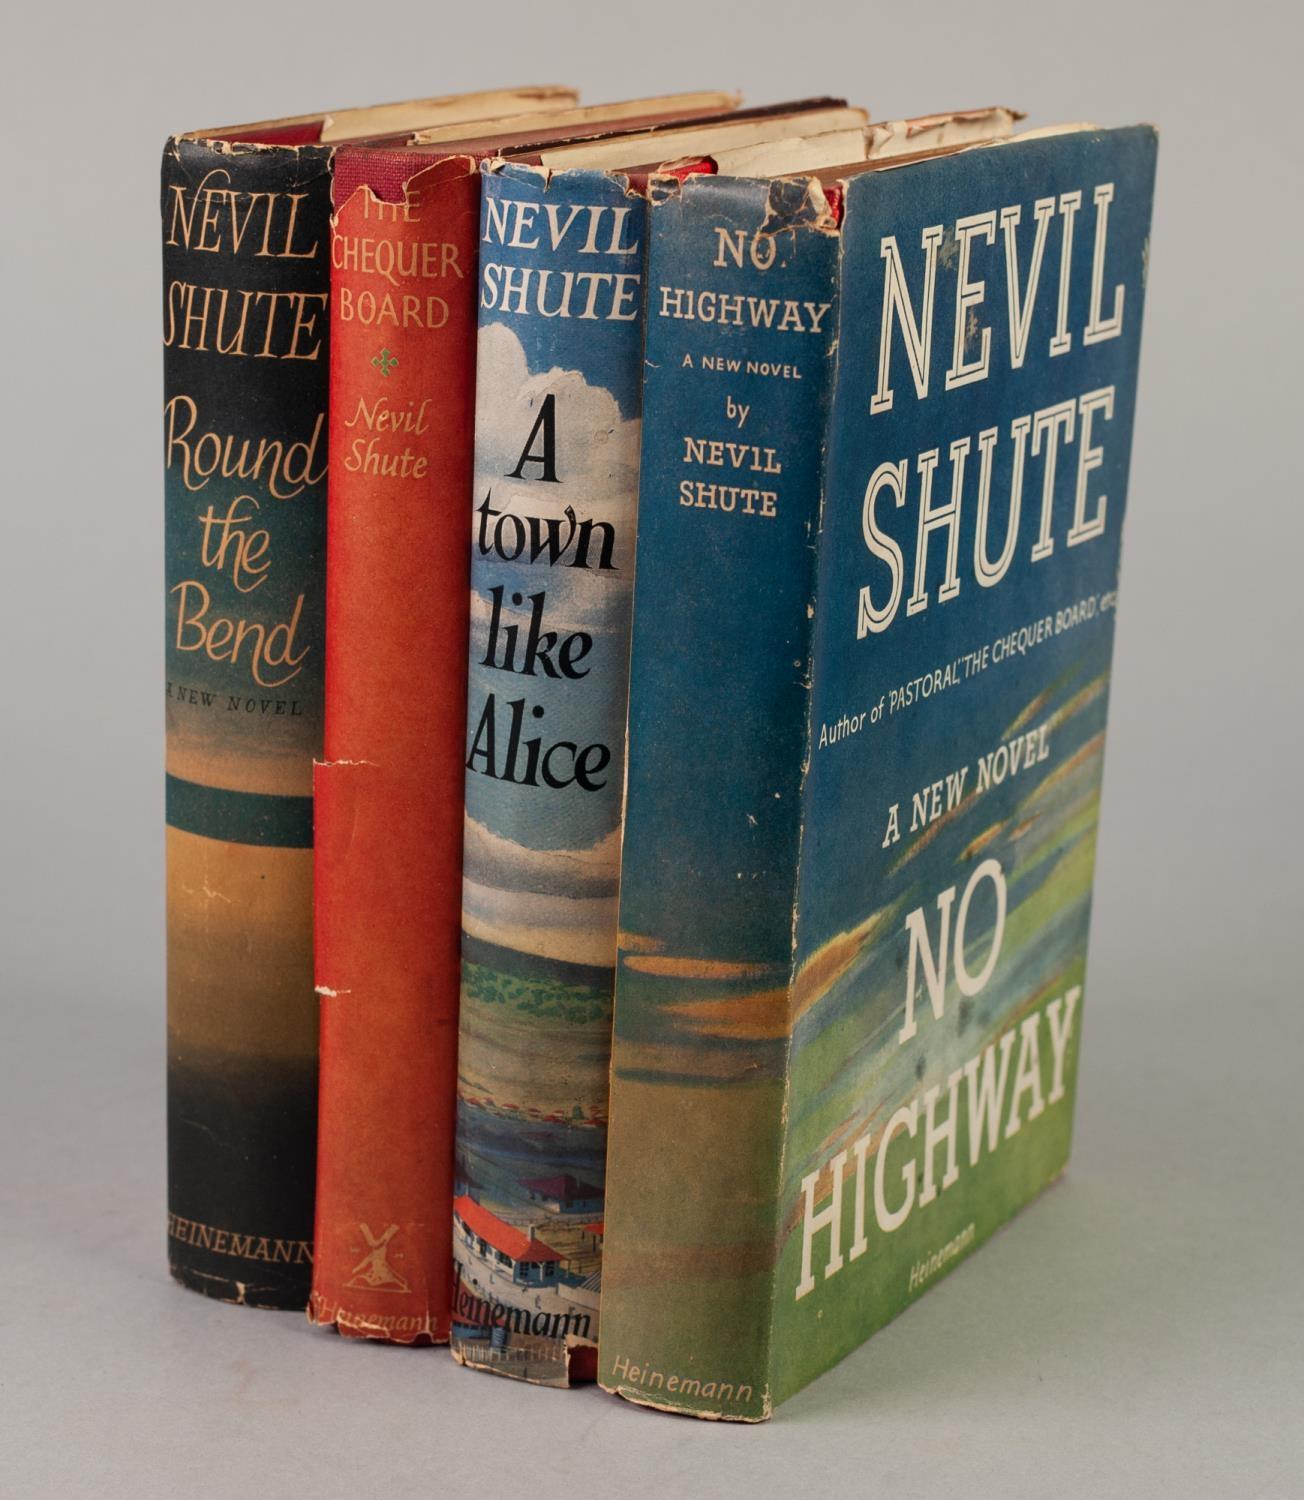 NEVIL SHUTE, A SELECTION OF FOUR TITLES (3 signed), publised by Heinemann and the Book Society, A